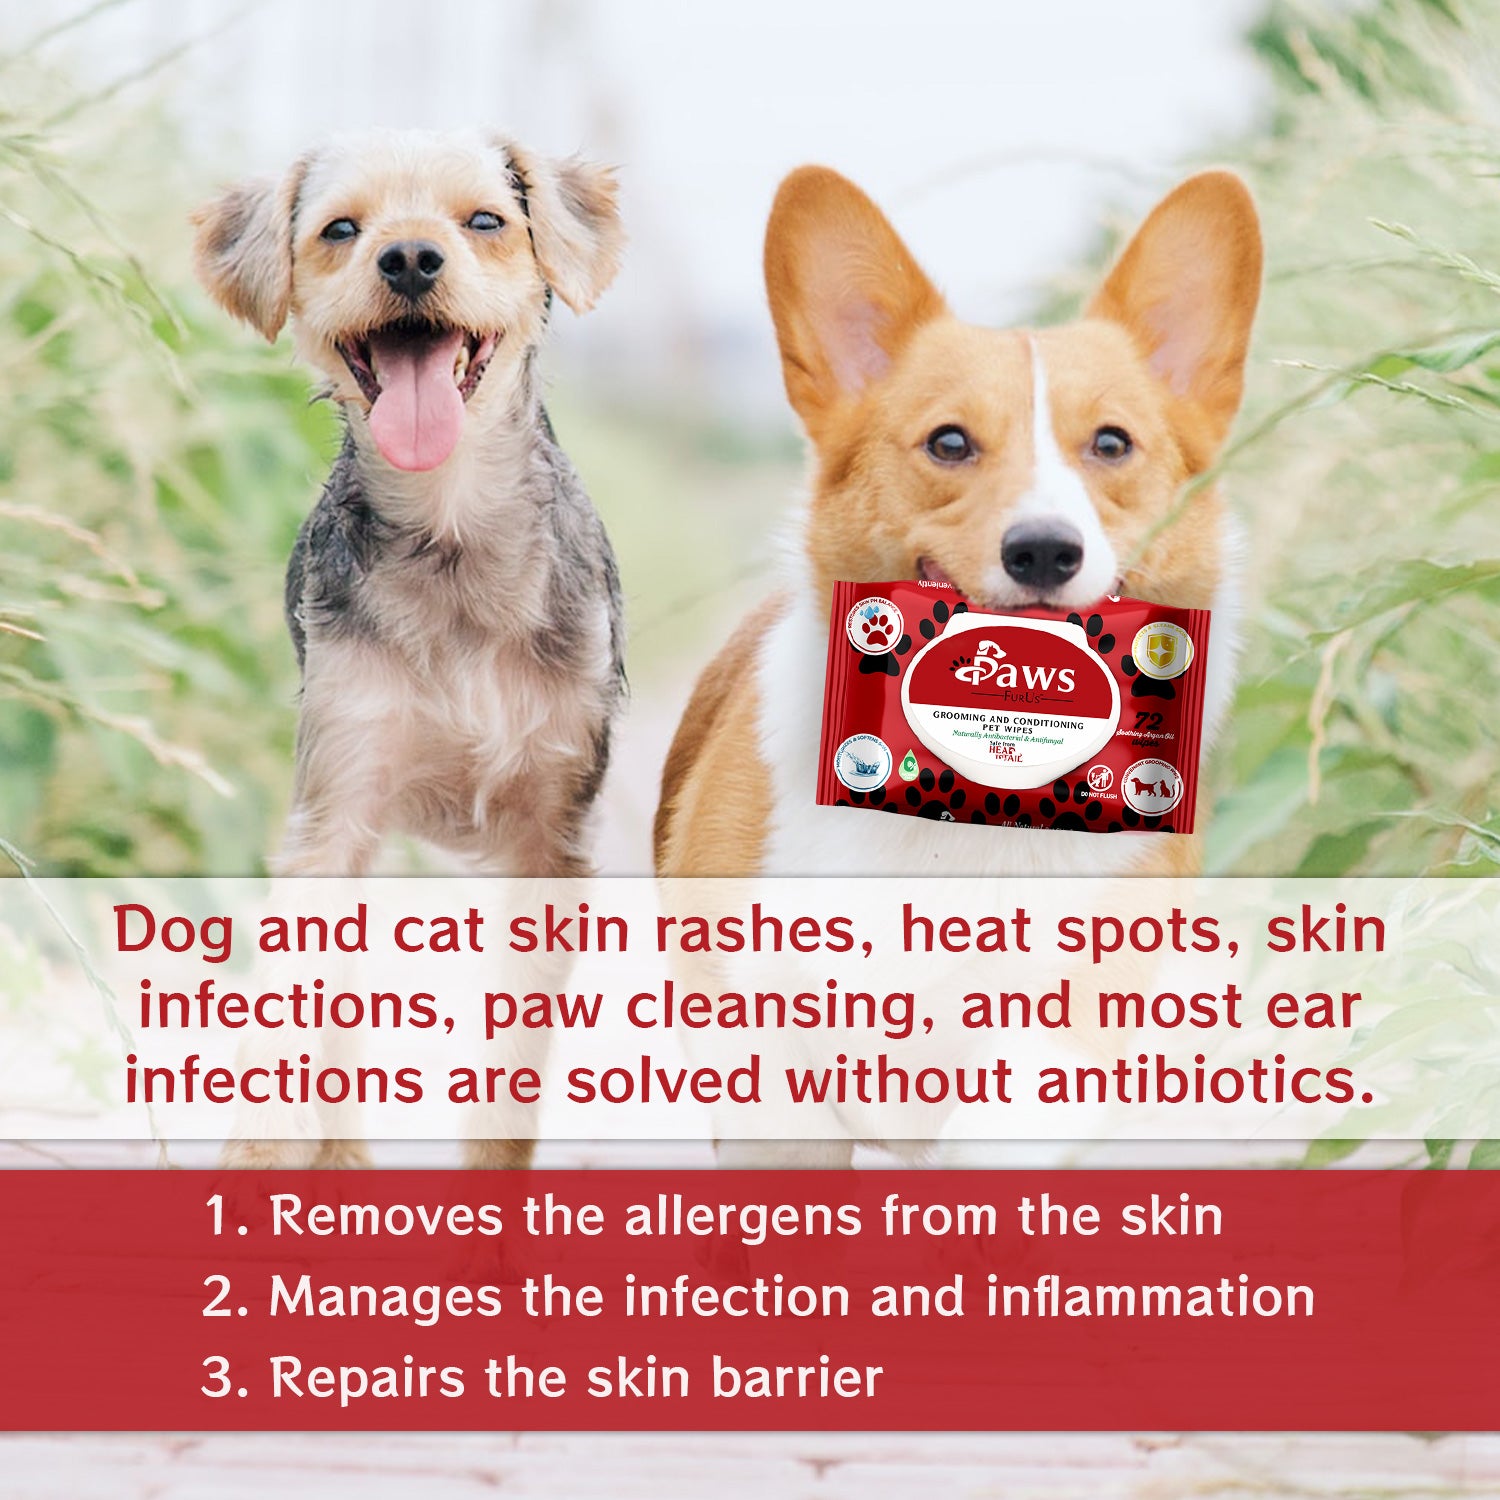 Dog and cat skin rashes, heat spots, skin infections, paw cleansing, and most ear infections are solved without antibiotics. 1. Removes the allergens from the skin. 2. Manages the infection and inflammation. 3. Repairs the skin barrier.